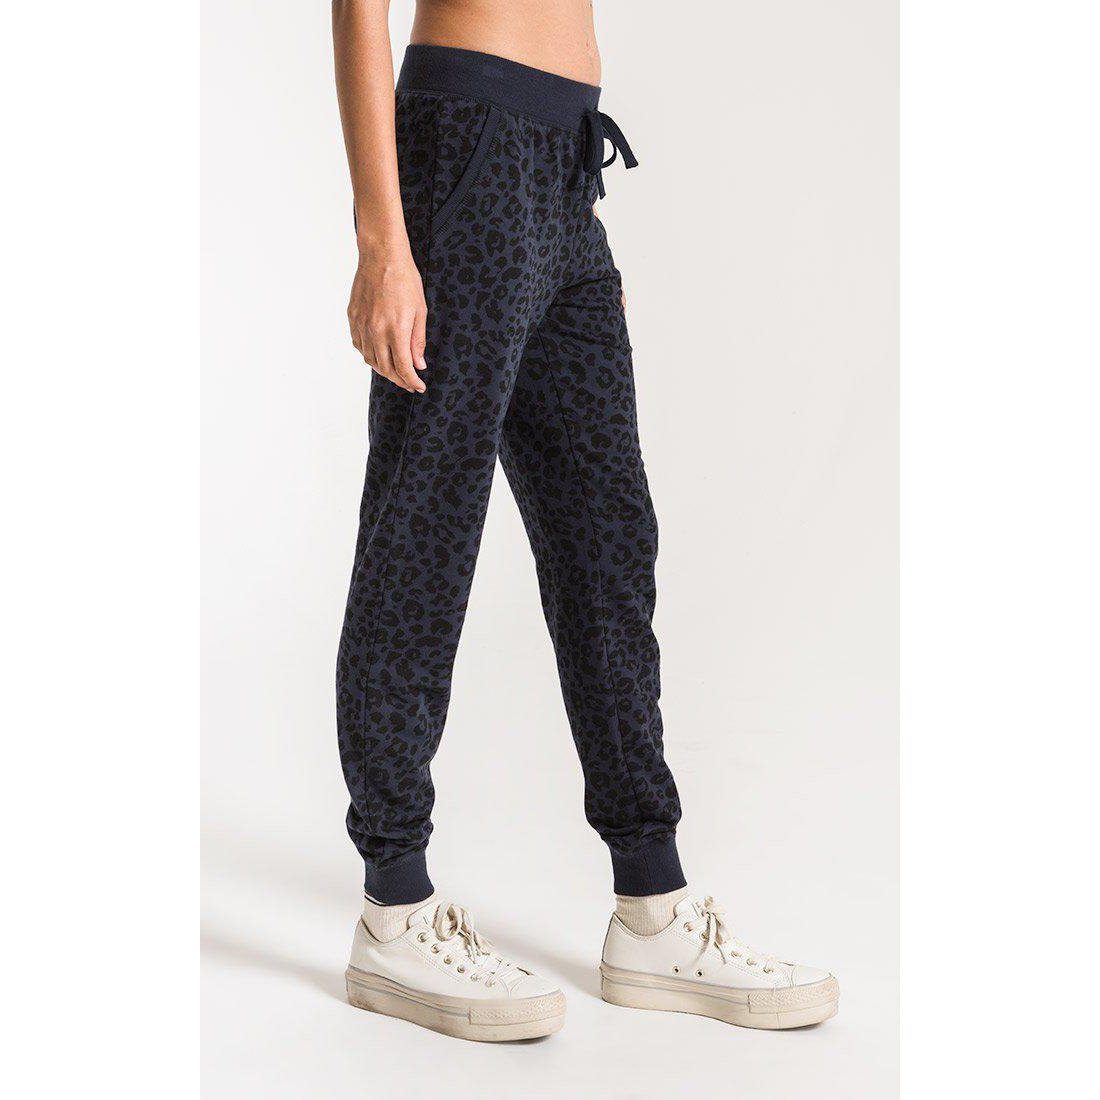 The Leopard Jogger